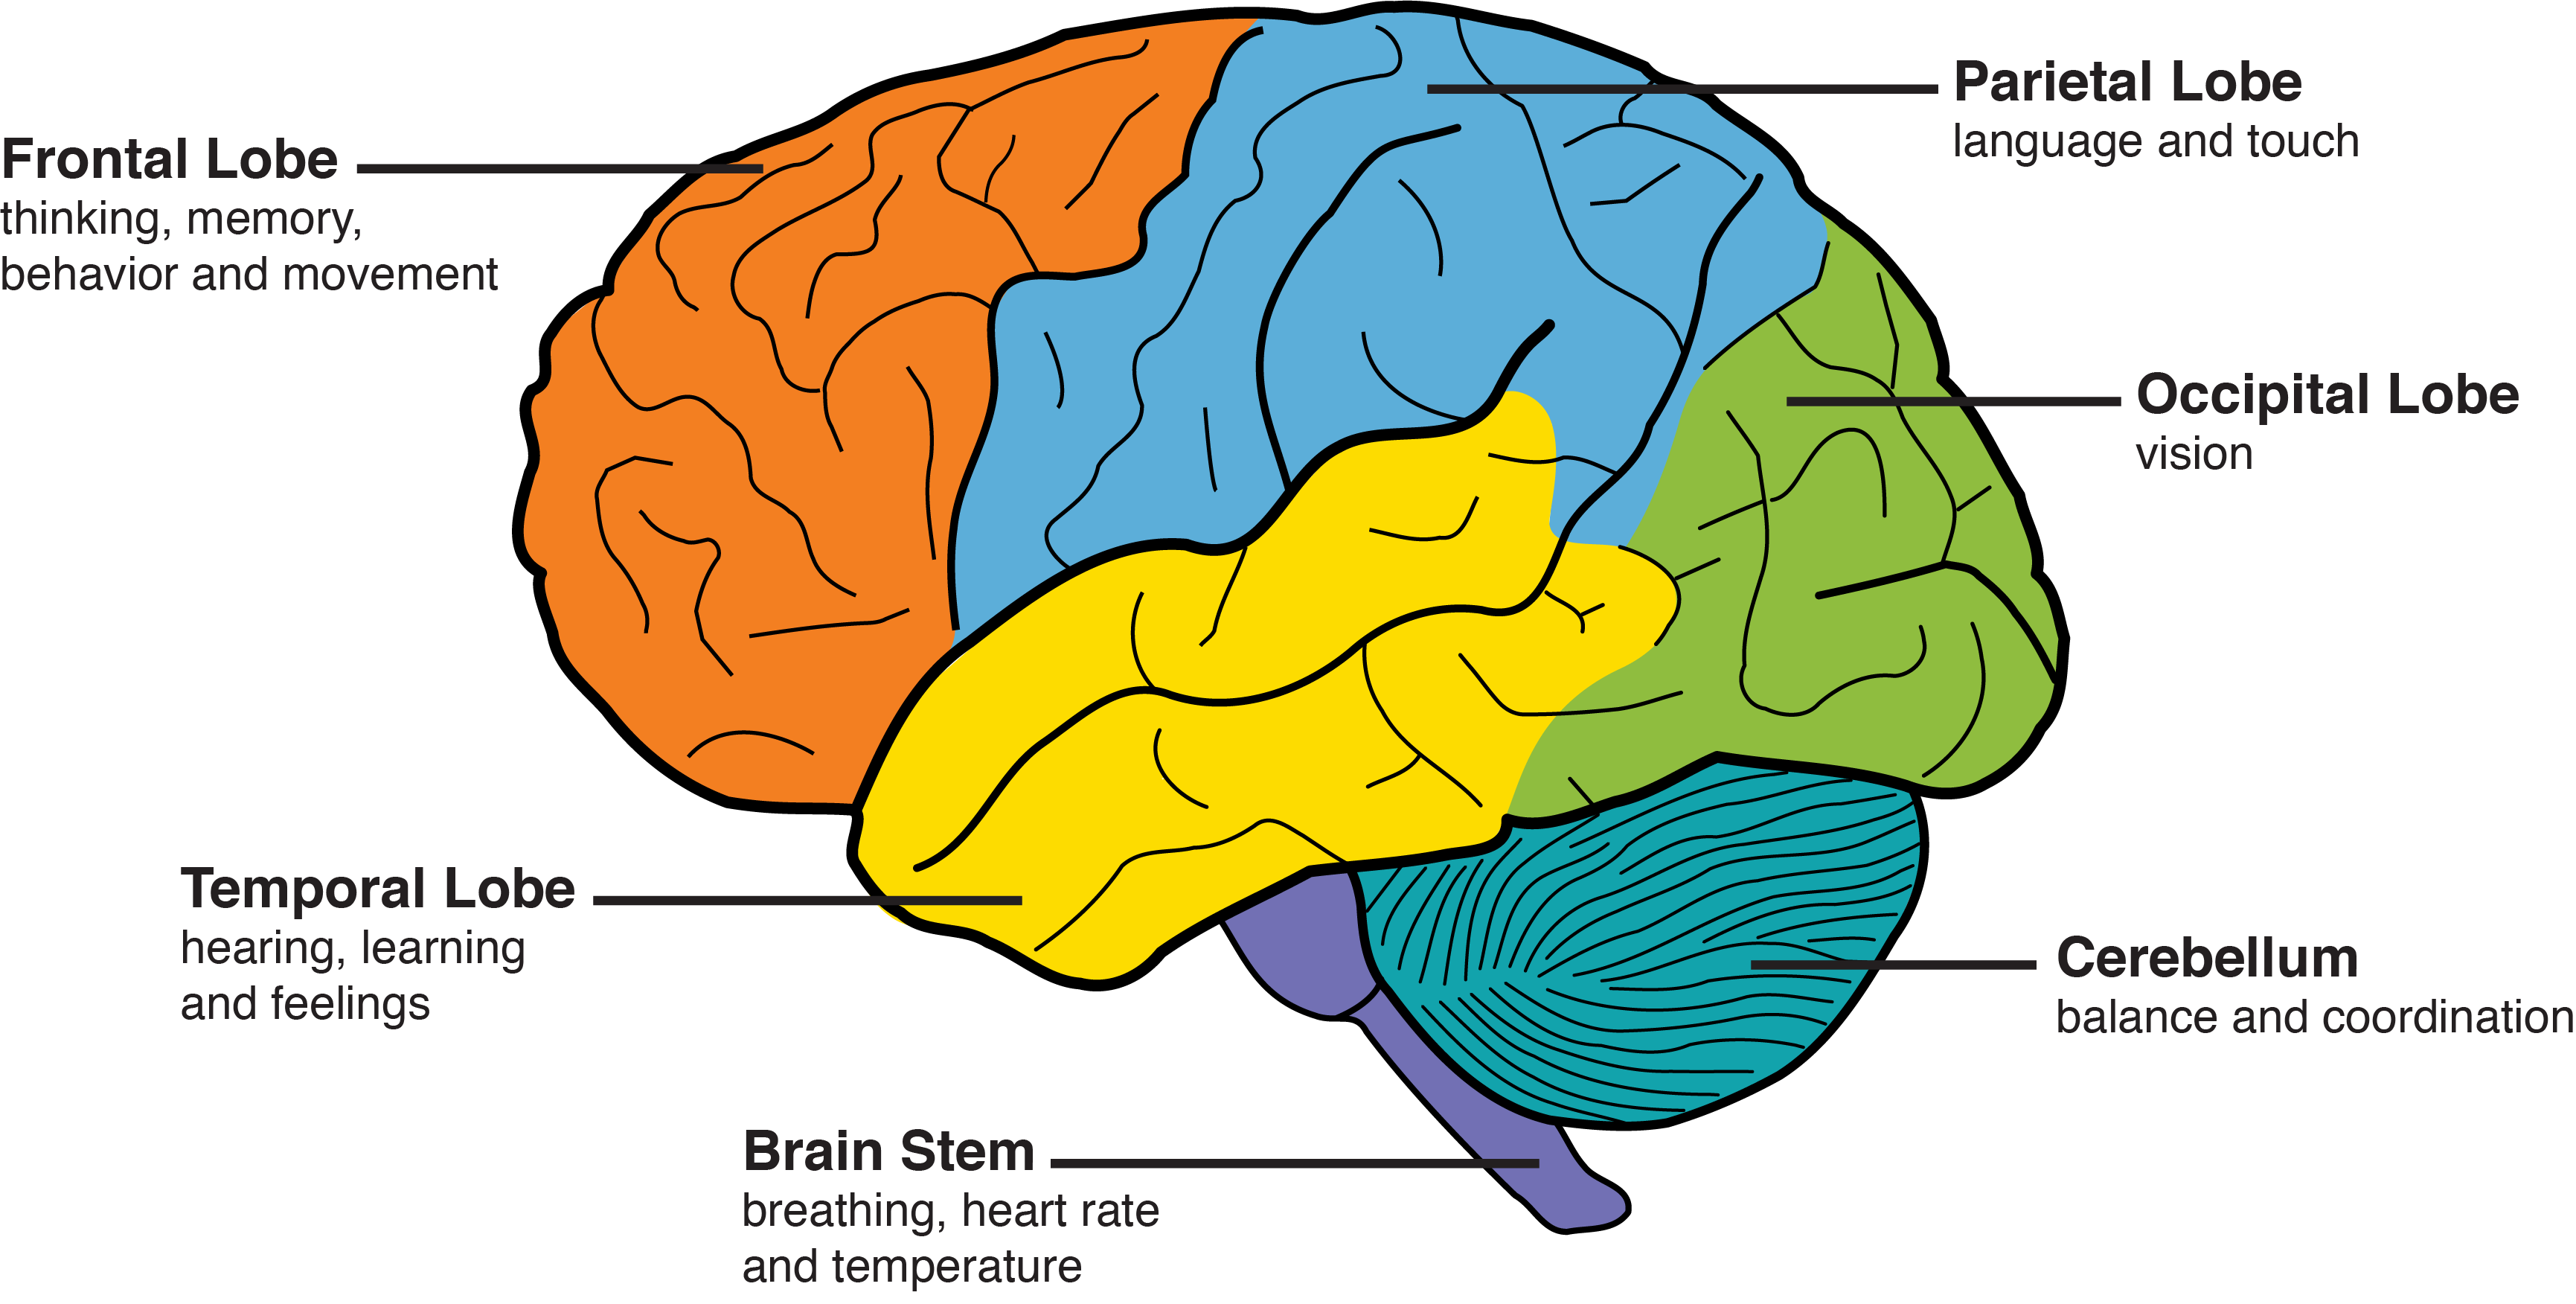 areas of the brain labeled with their major functions. Frontal lobes: thinking, memory, behavior, movement. Temporal lobes: hearing, learning, feelings. Brain stem: breathing, heart rate, temperature. Cerebellum: balance, coordination. Occipital lobes: vision. Parietal lobes: language, touch.